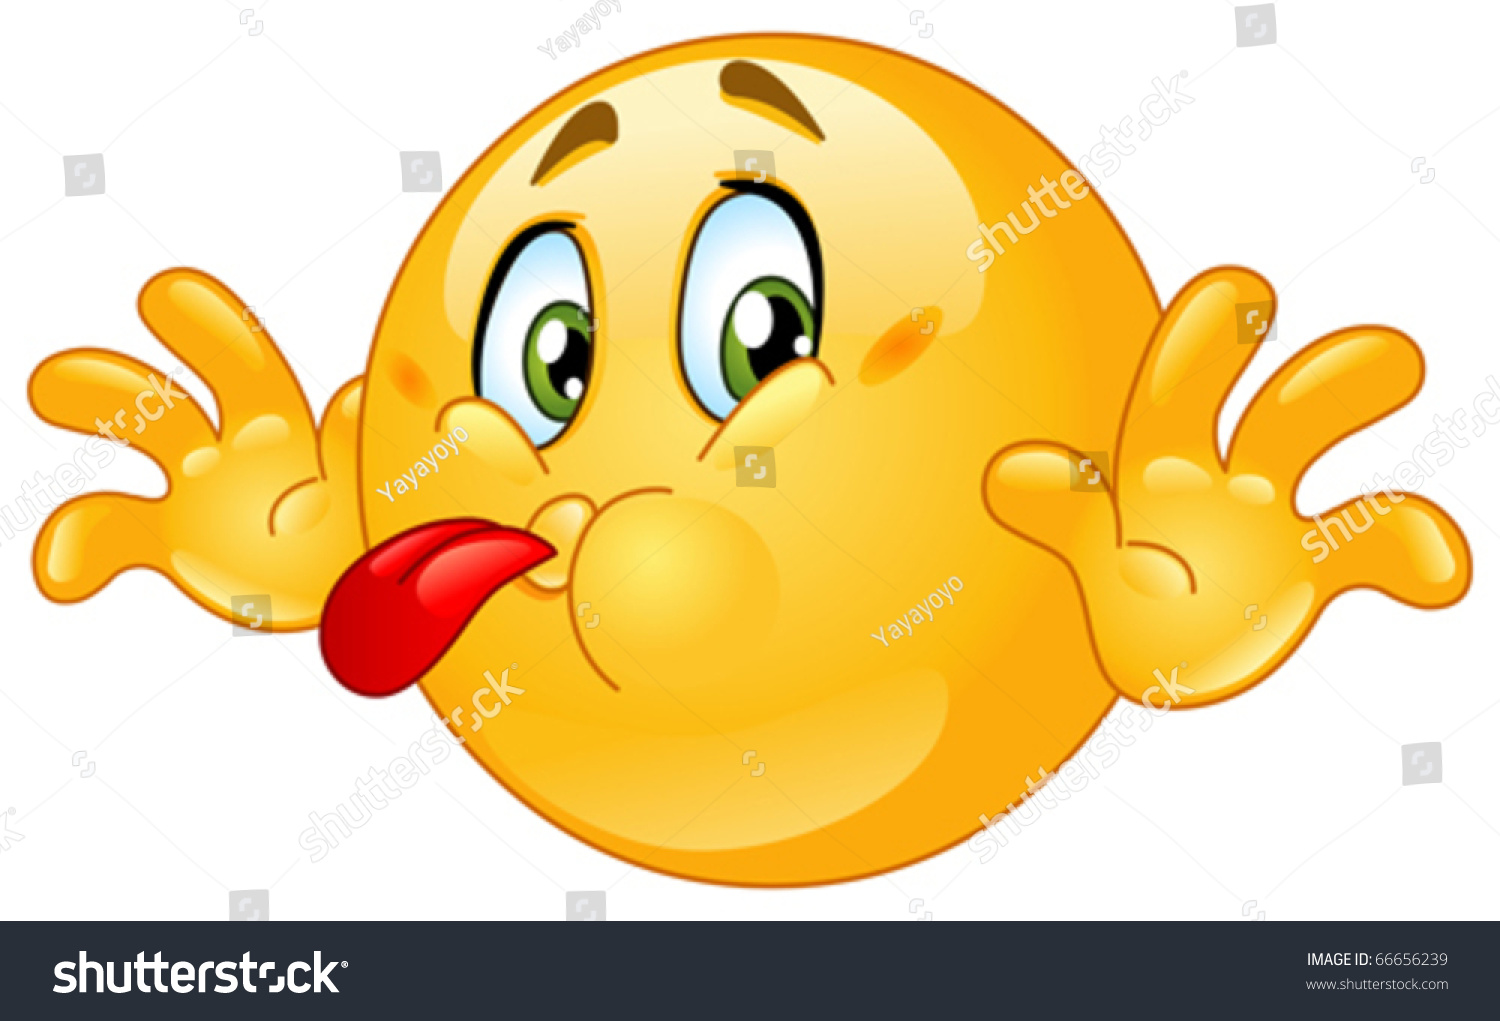 clipart of girl sticking out her tongue - photo #10